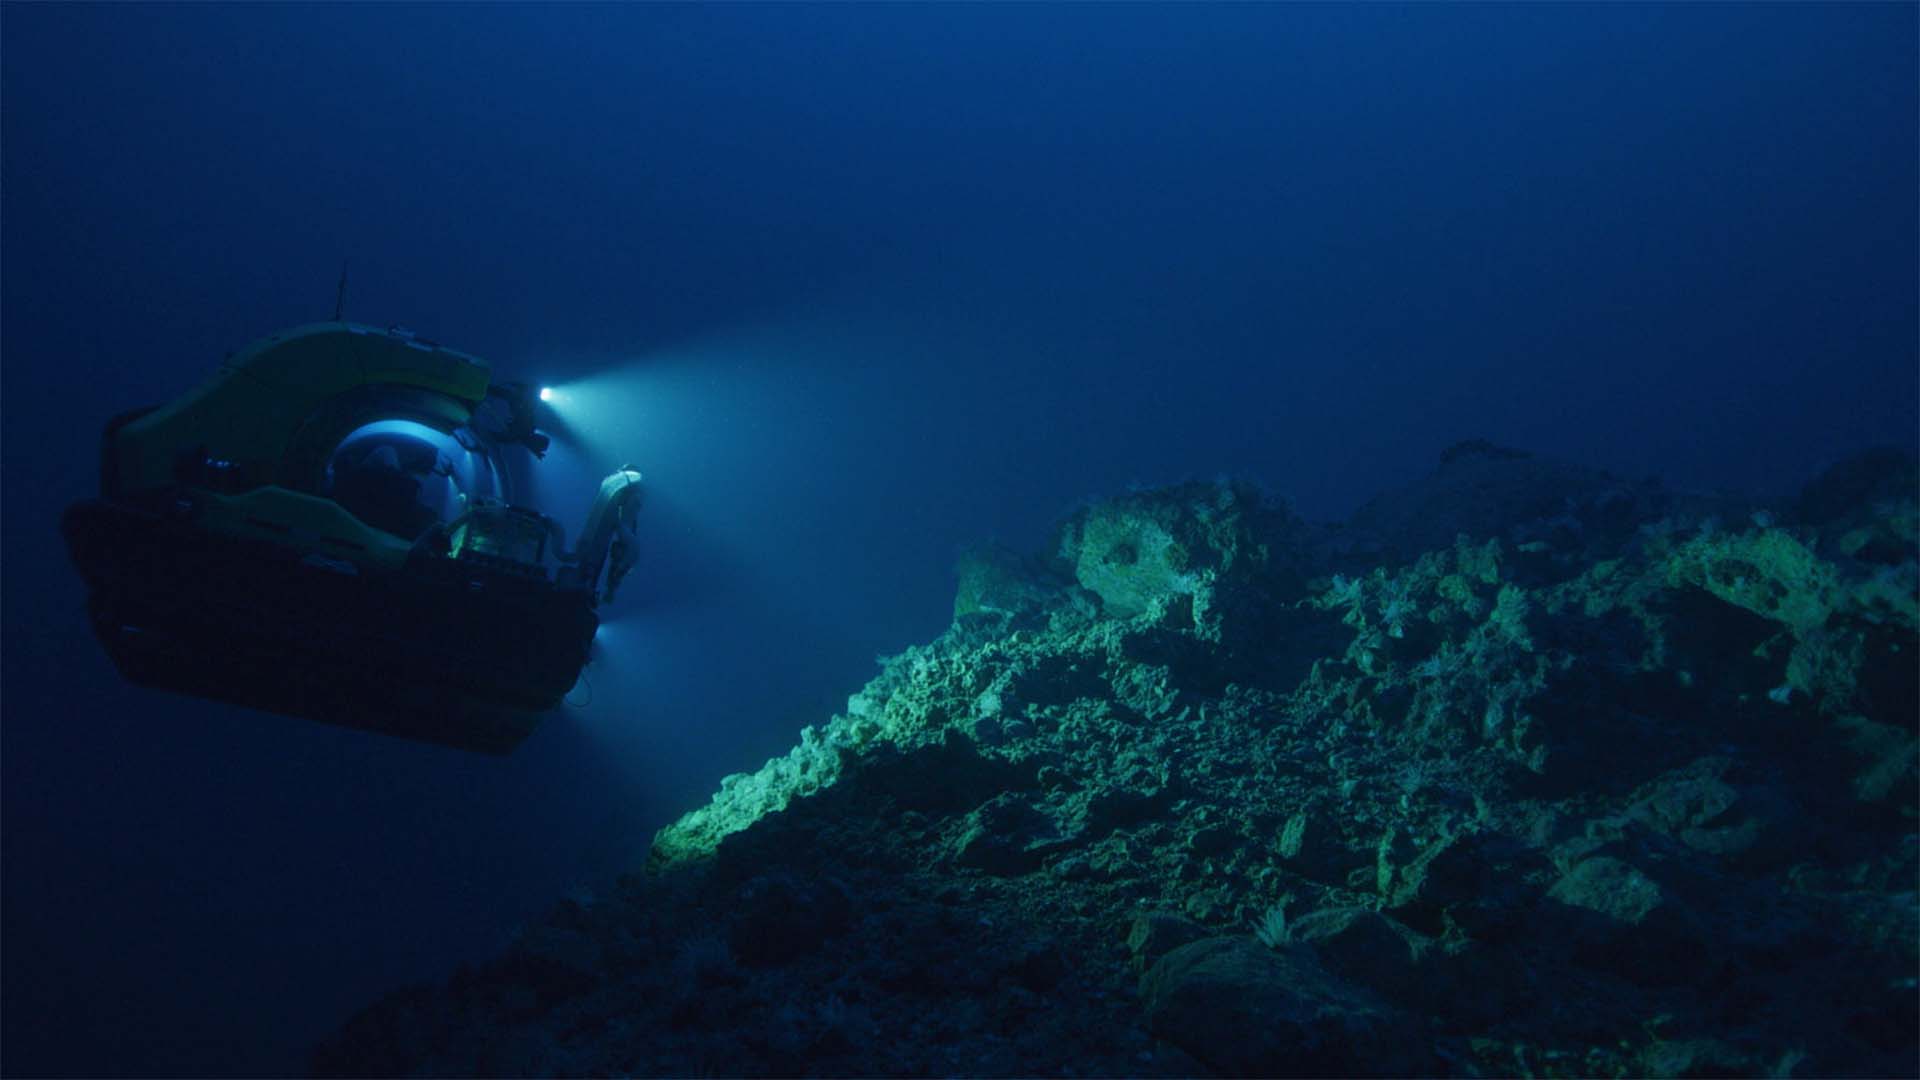  During a 2017 expedition, WHOI geologist Frieder Klein explored the geology of St. Peter and St. Paul Archipelagoes along the St. Paul Fracture Zone. Alvin will allow much greater exploration of the seafloor in this seismically-active region. (Photo courtesy of OceanX Media ©Woods Hole Oceanographic Institution)